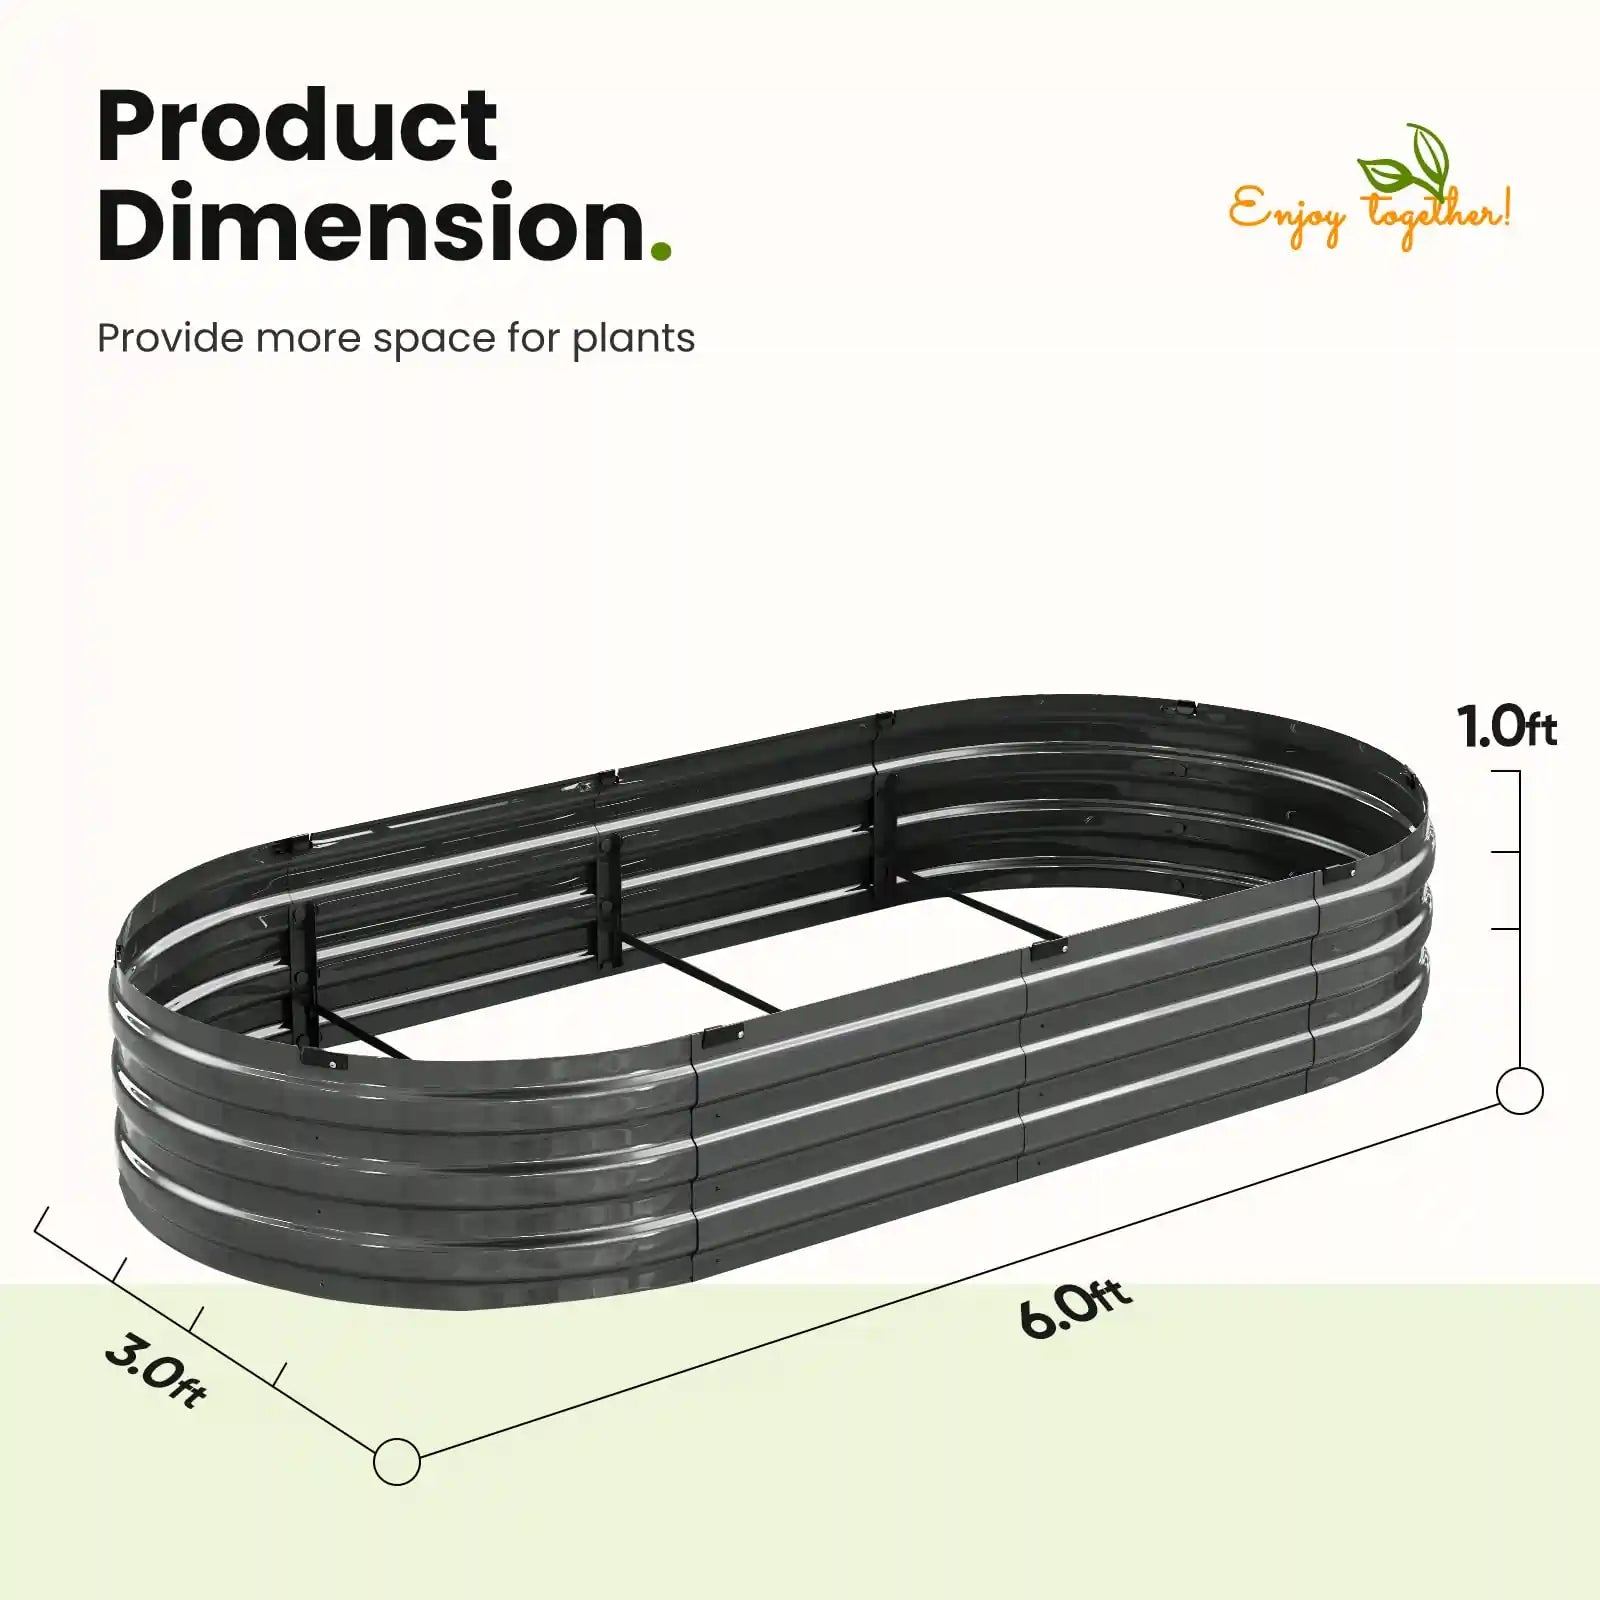 KING BIRD Screwless Raised Garden Bed 6x3x1ft product dimension#size_6x3x1ft